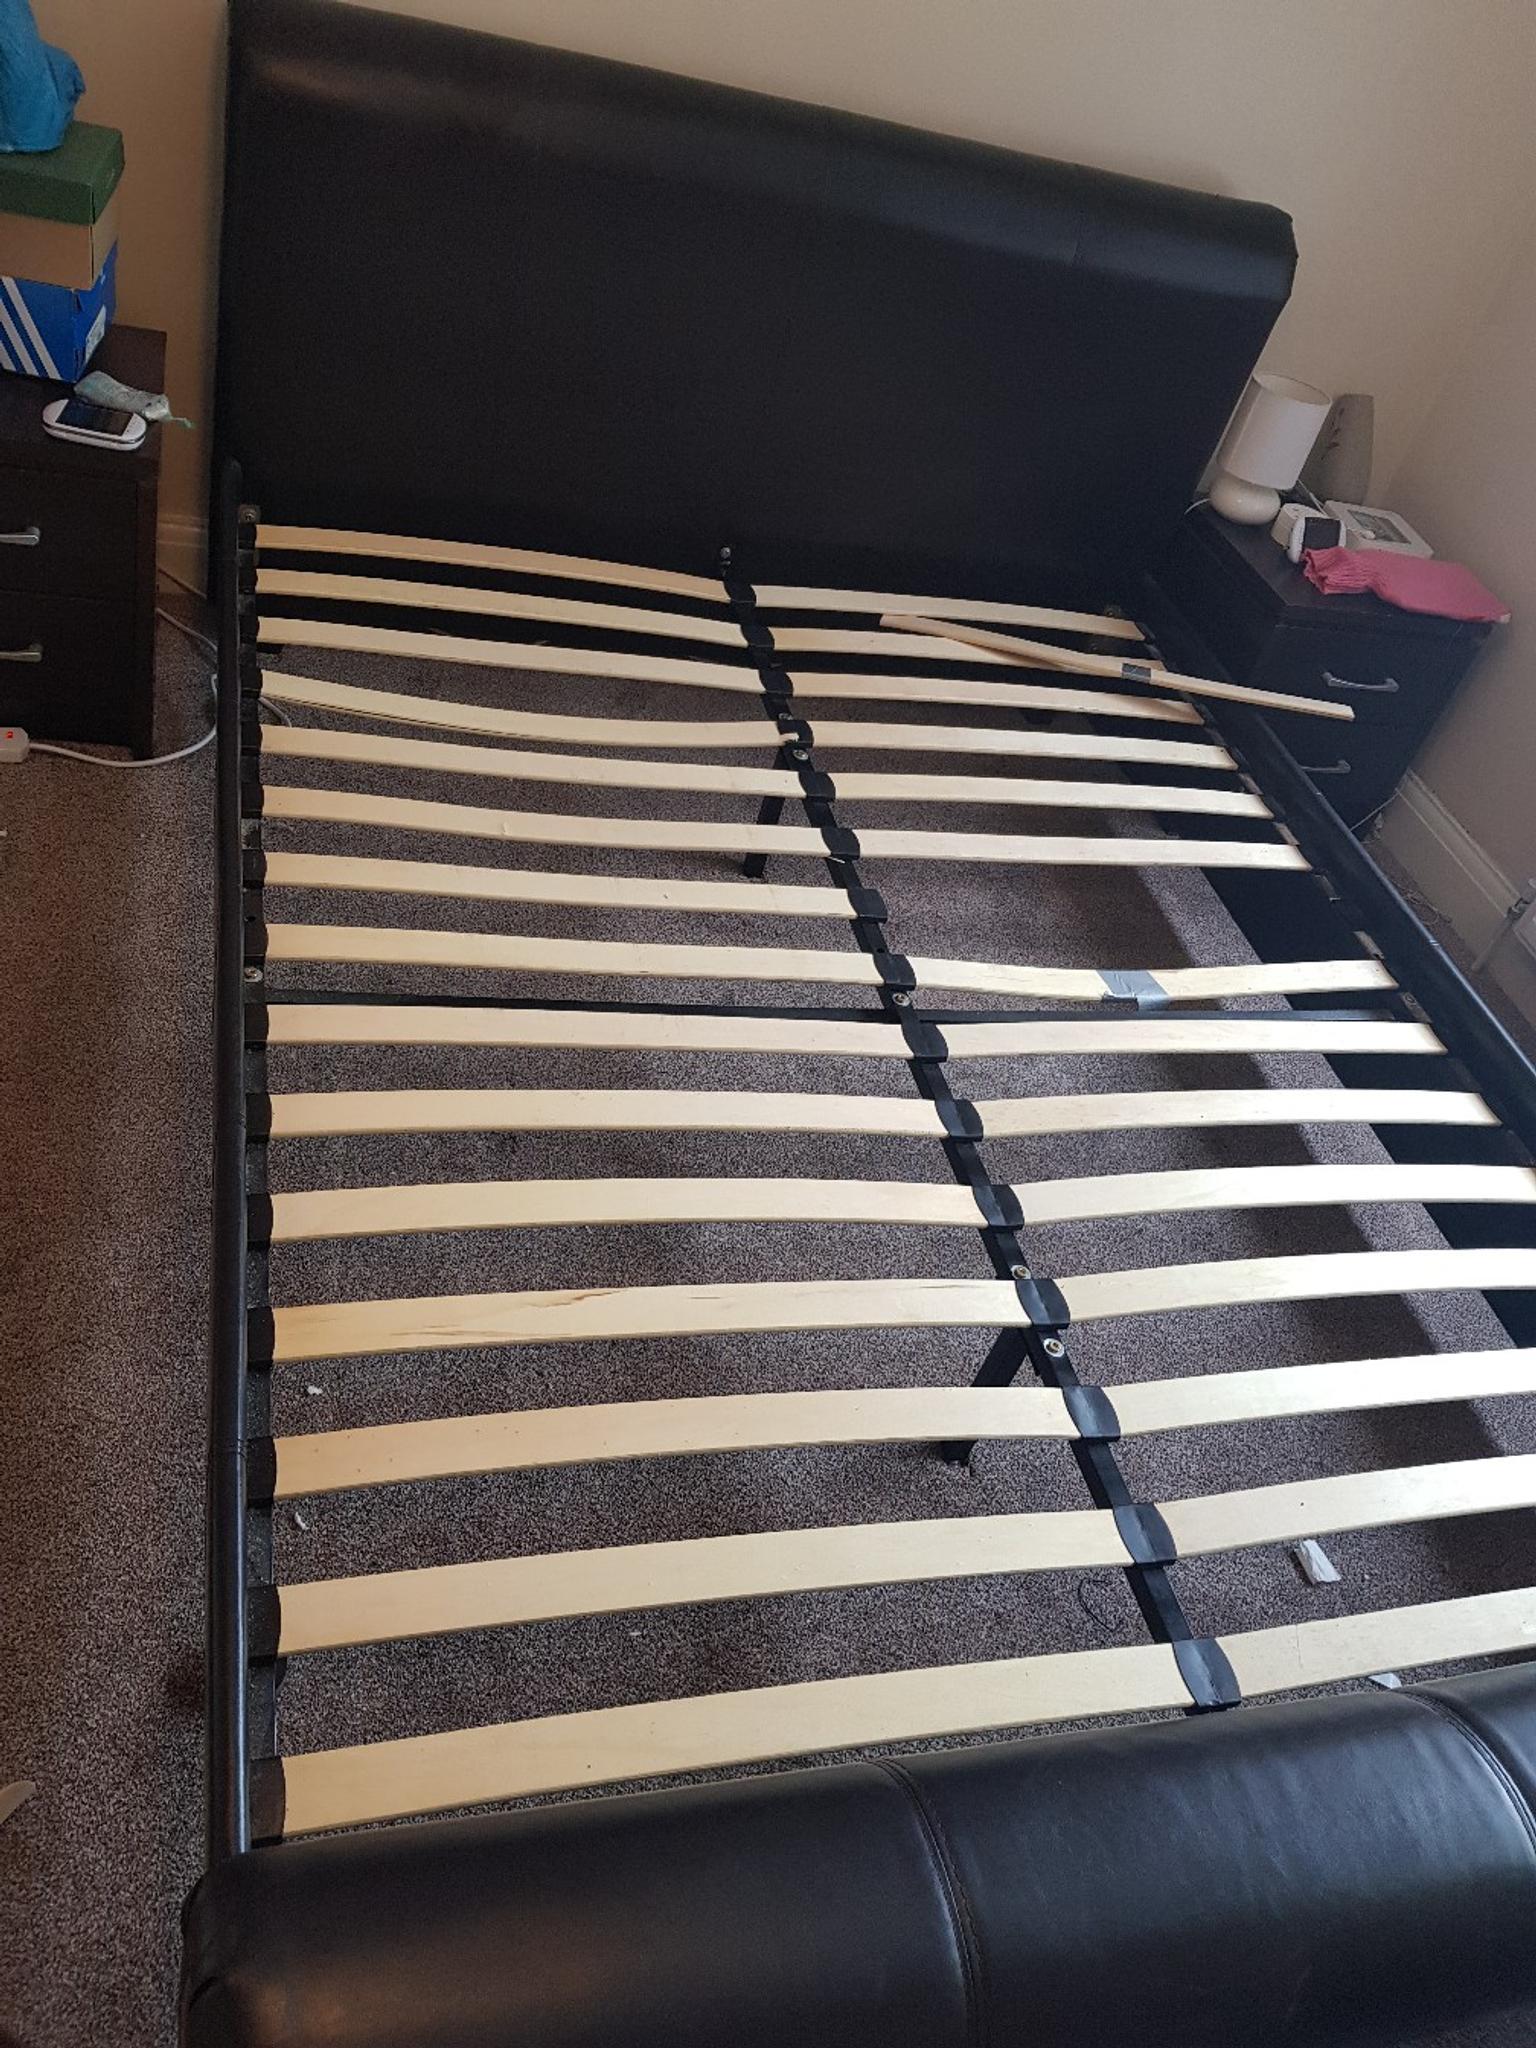 King Size Ottoman Bed Frame Used In, Used King Size Bed Frame